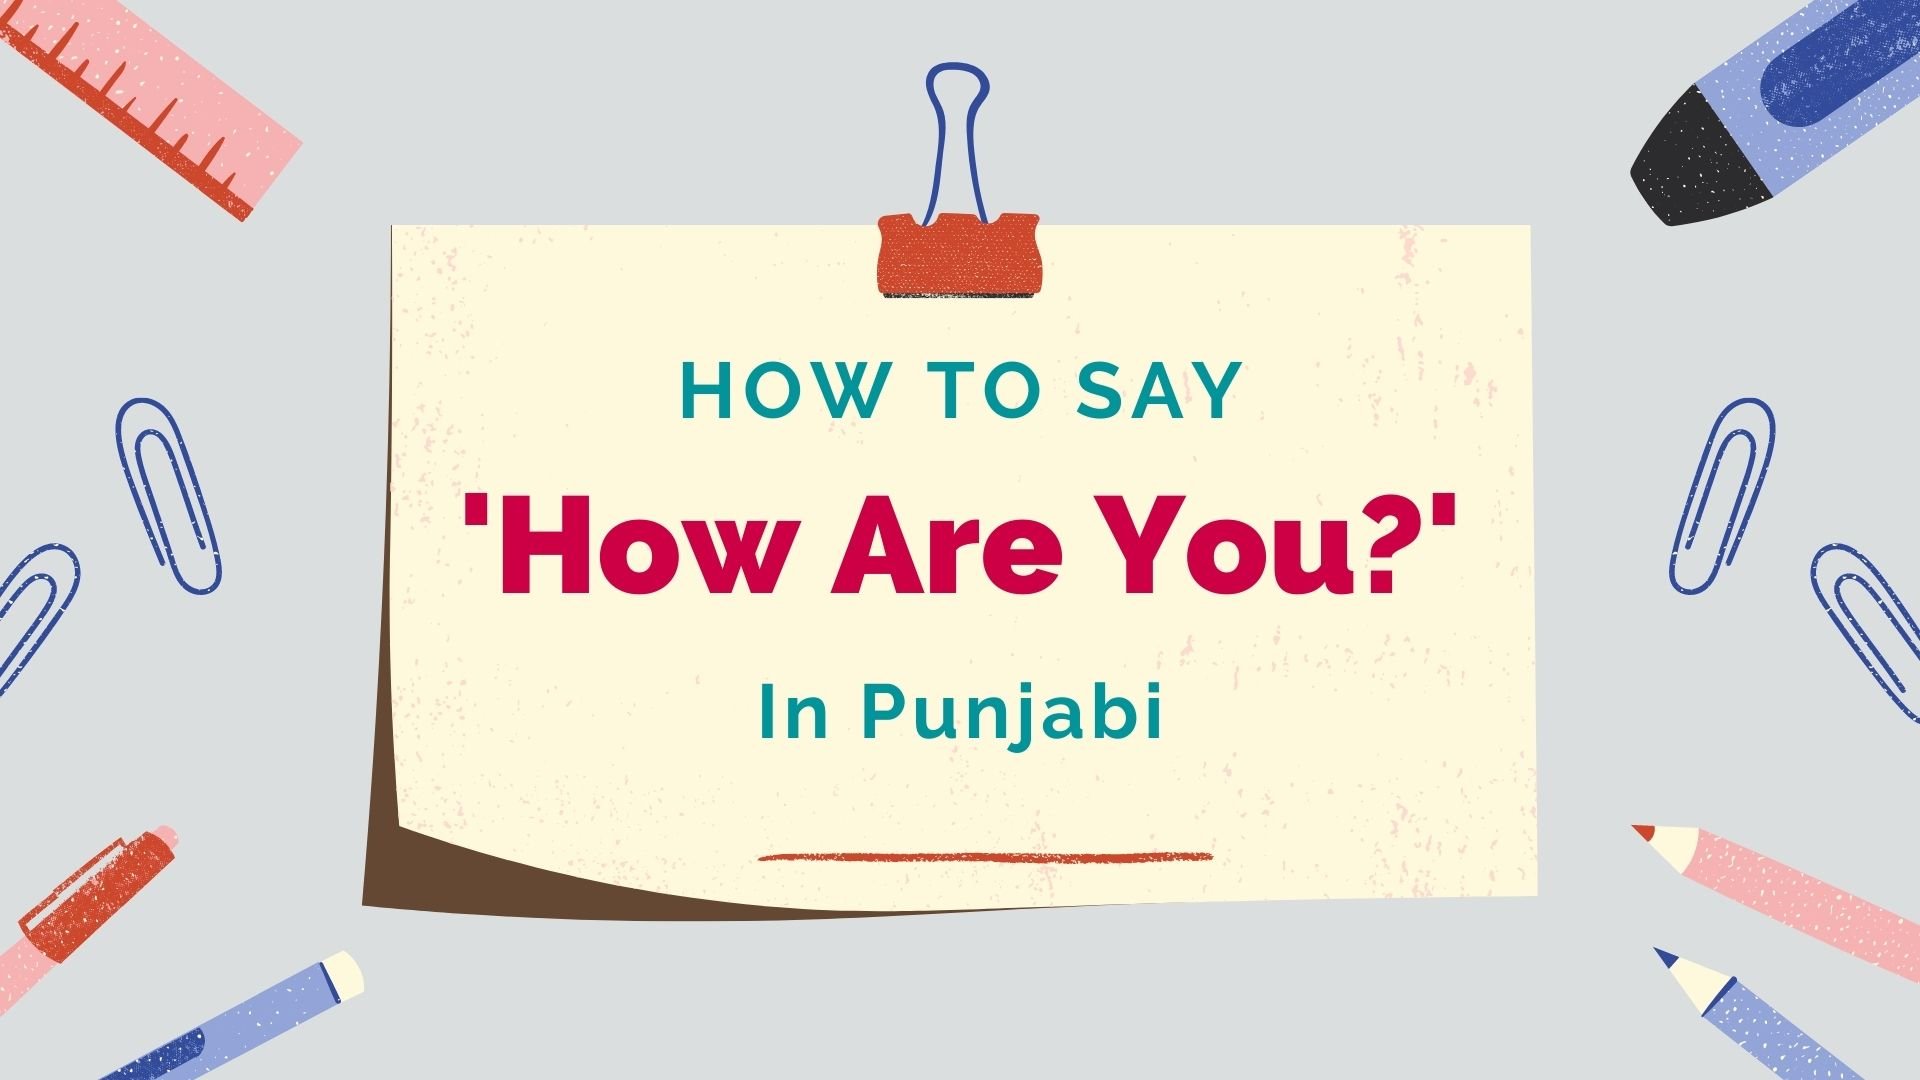 How To Say 'How Are You?' In Punjabi & Common Responses - Lingalot